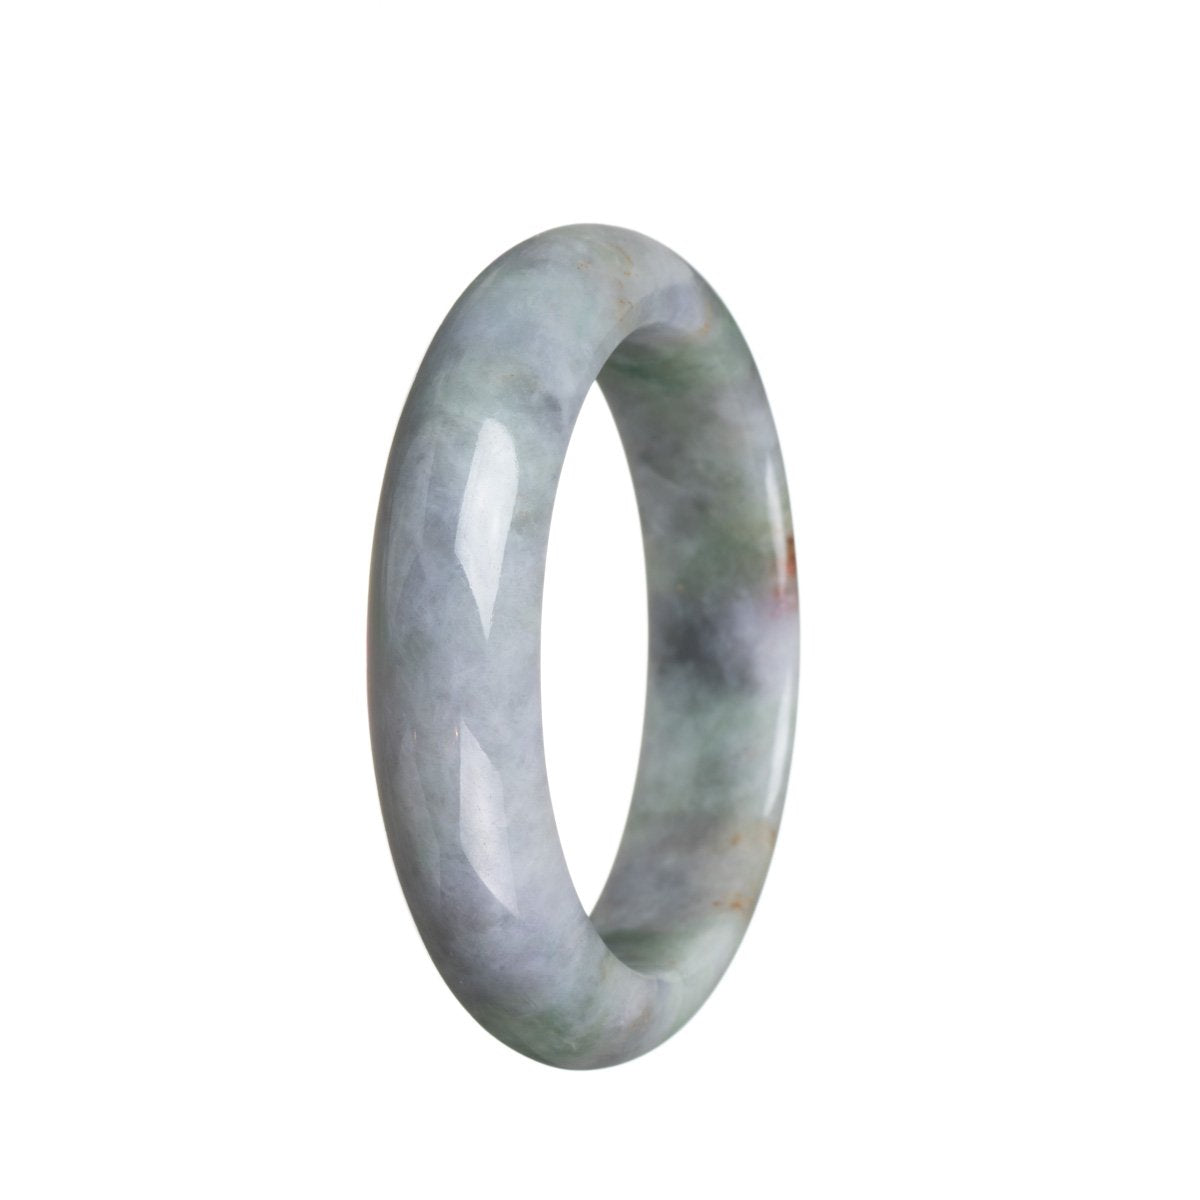 A close-up image of a lavender and green bracelet made with authentic grade A lavender and green jadeite stones. The bracelet has a semi-round shape and measures 52mm in diameter. It is a product of MAYS™.